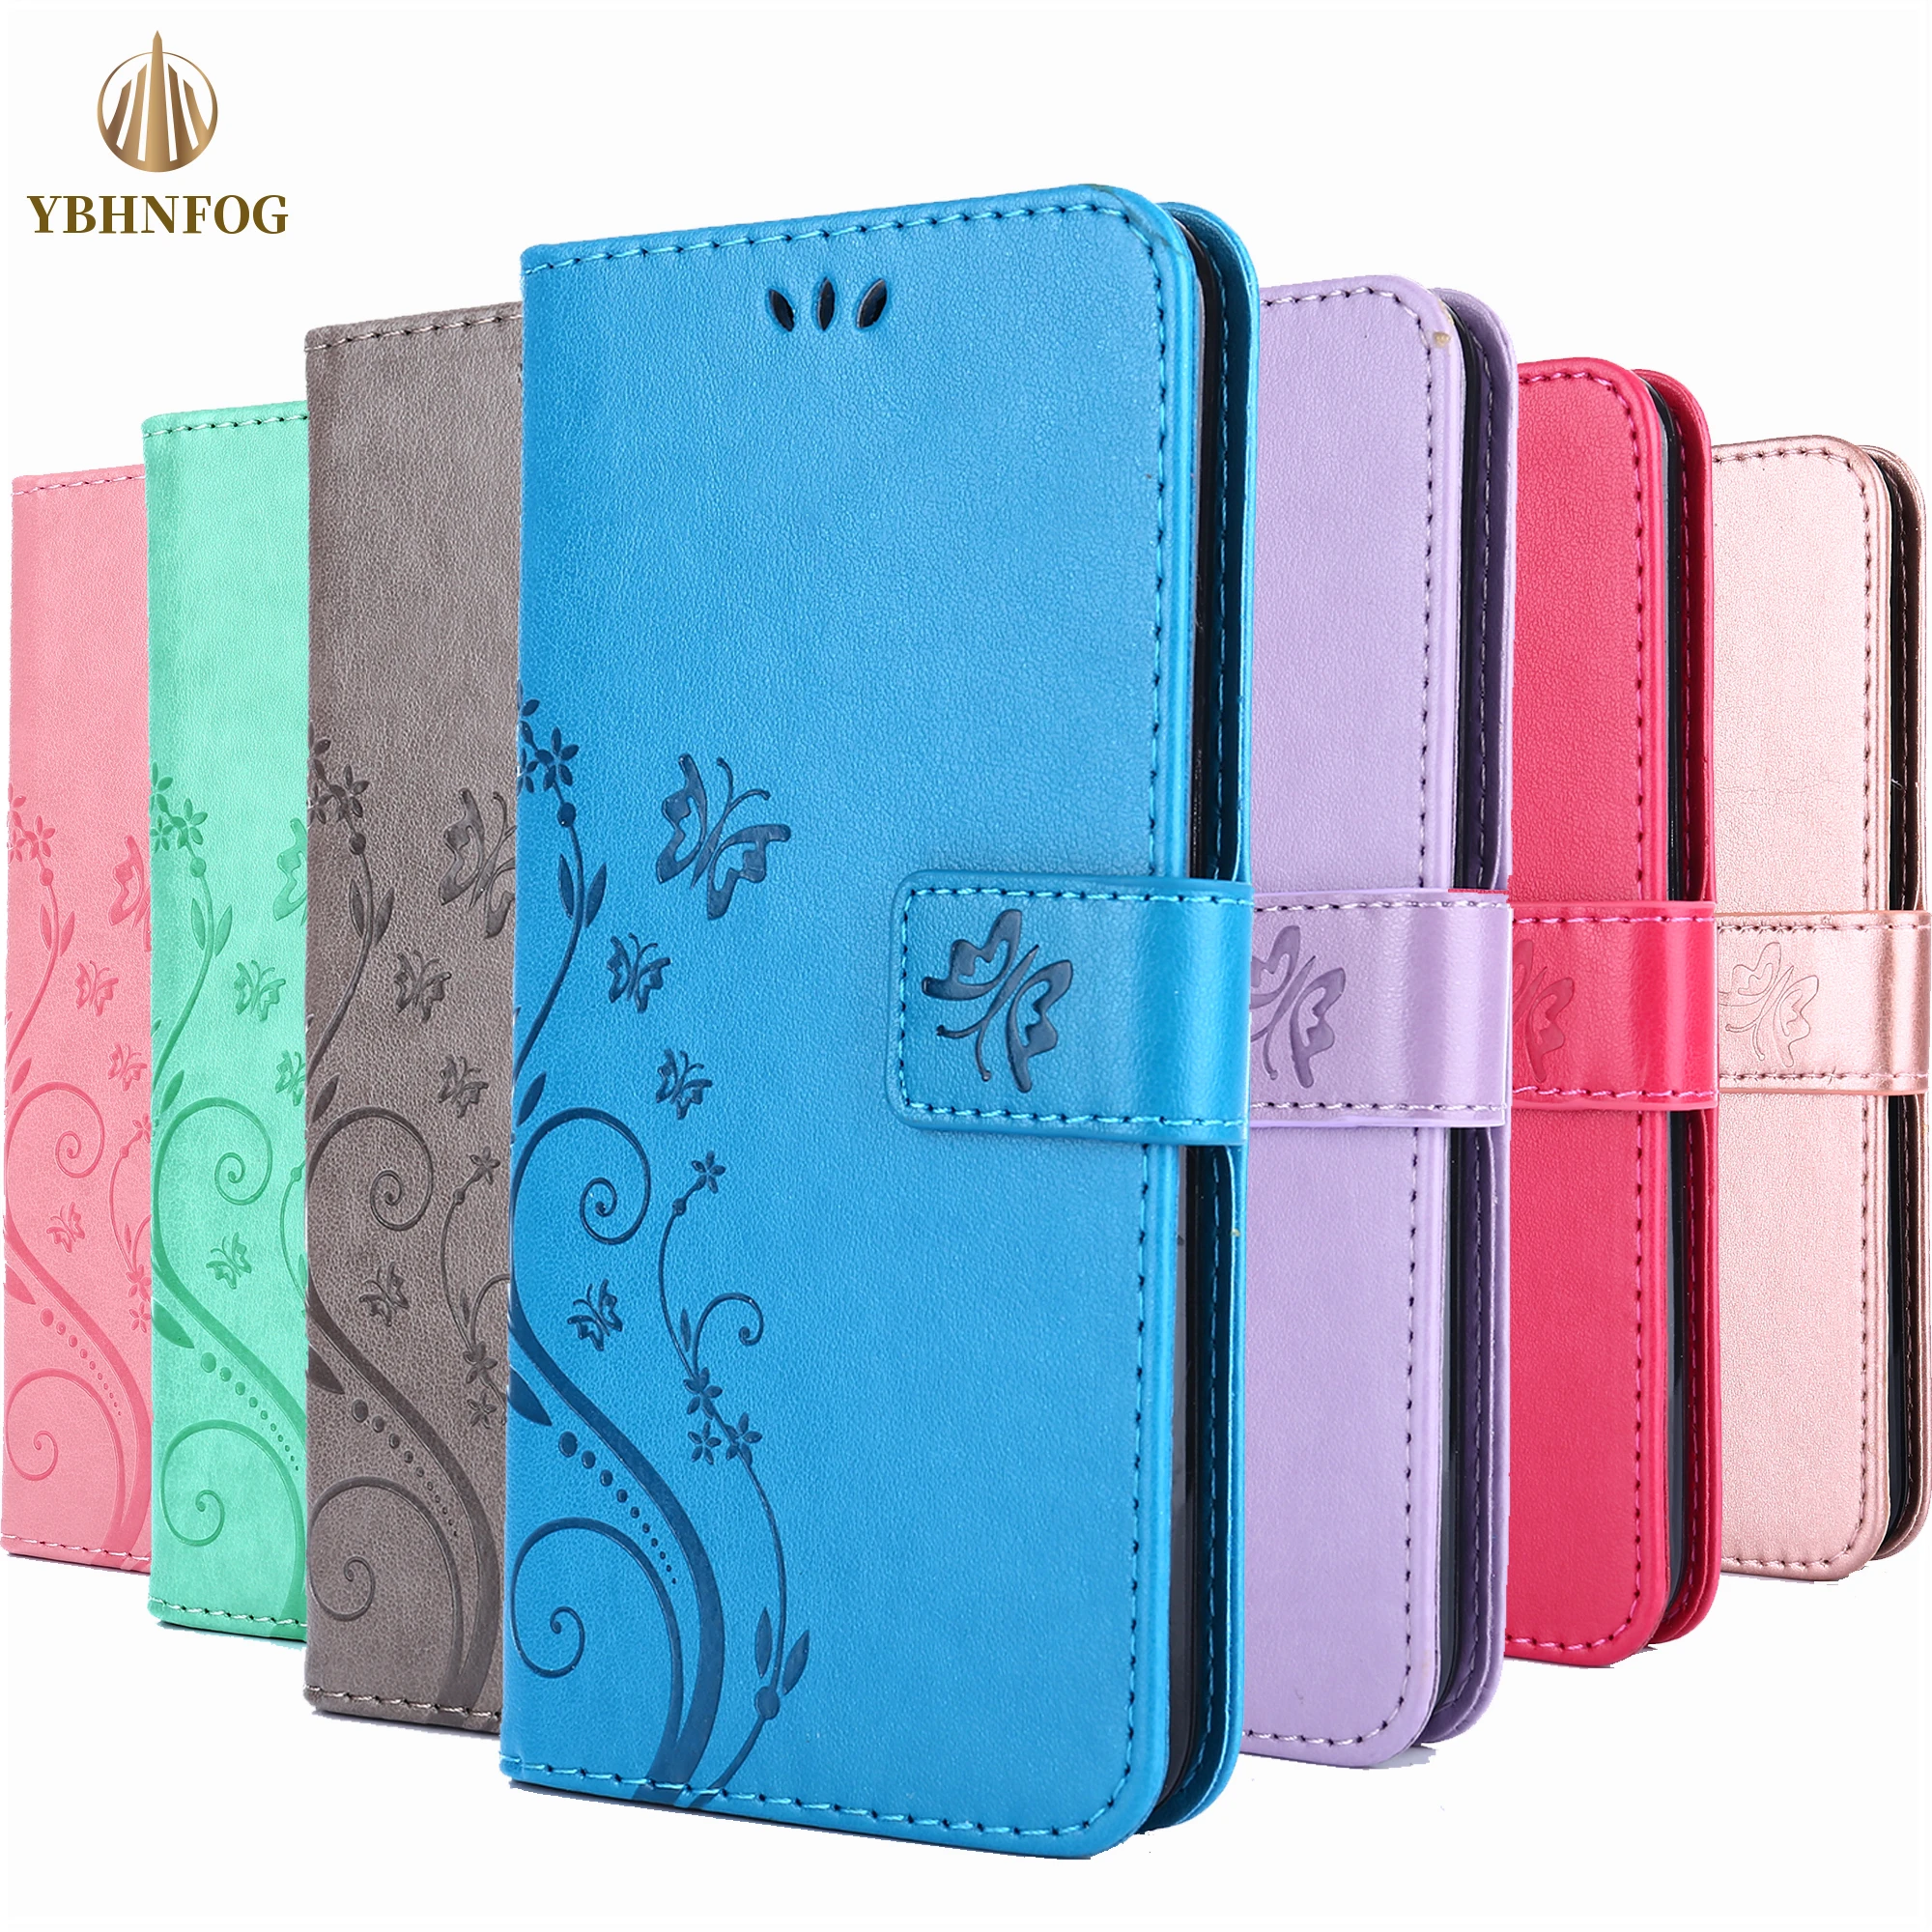 Luxury Flip Case For iPhone 13 12 Mini 11 Pro XR XS Max Leather Holder Stand For iPhone 6 6S 7 8 Plus SE 2020 2022 Wallet Cover iphone xr cover